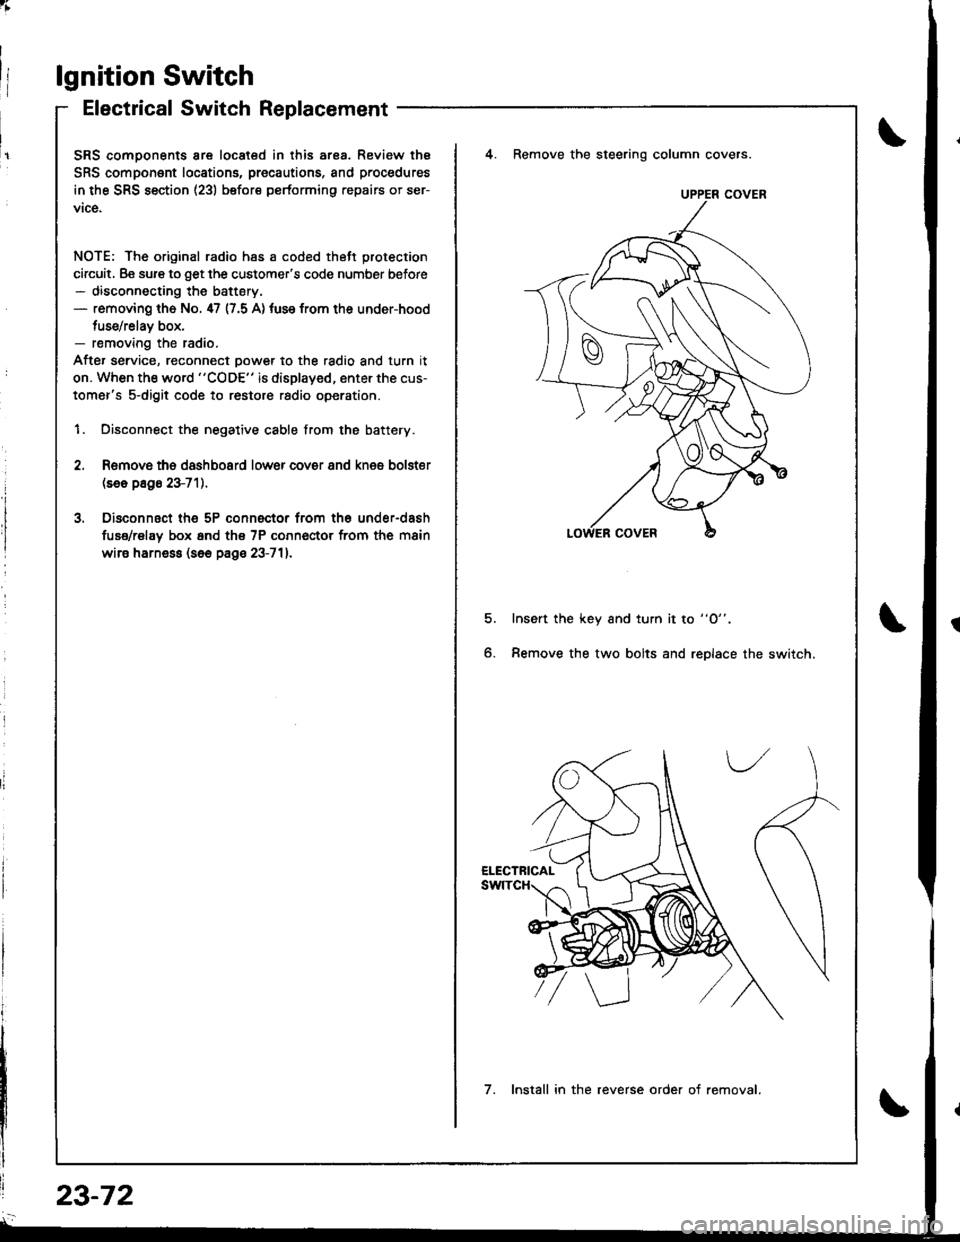 ACURA INTEGRA 1998  Service Repair Manual lgnition Switch
Electrical Switch Replacement
SRS comoonents are located in this ar8a. Review thE
SRS component locations, precautions, and procedures
in the SRS section (23) before performing repairs